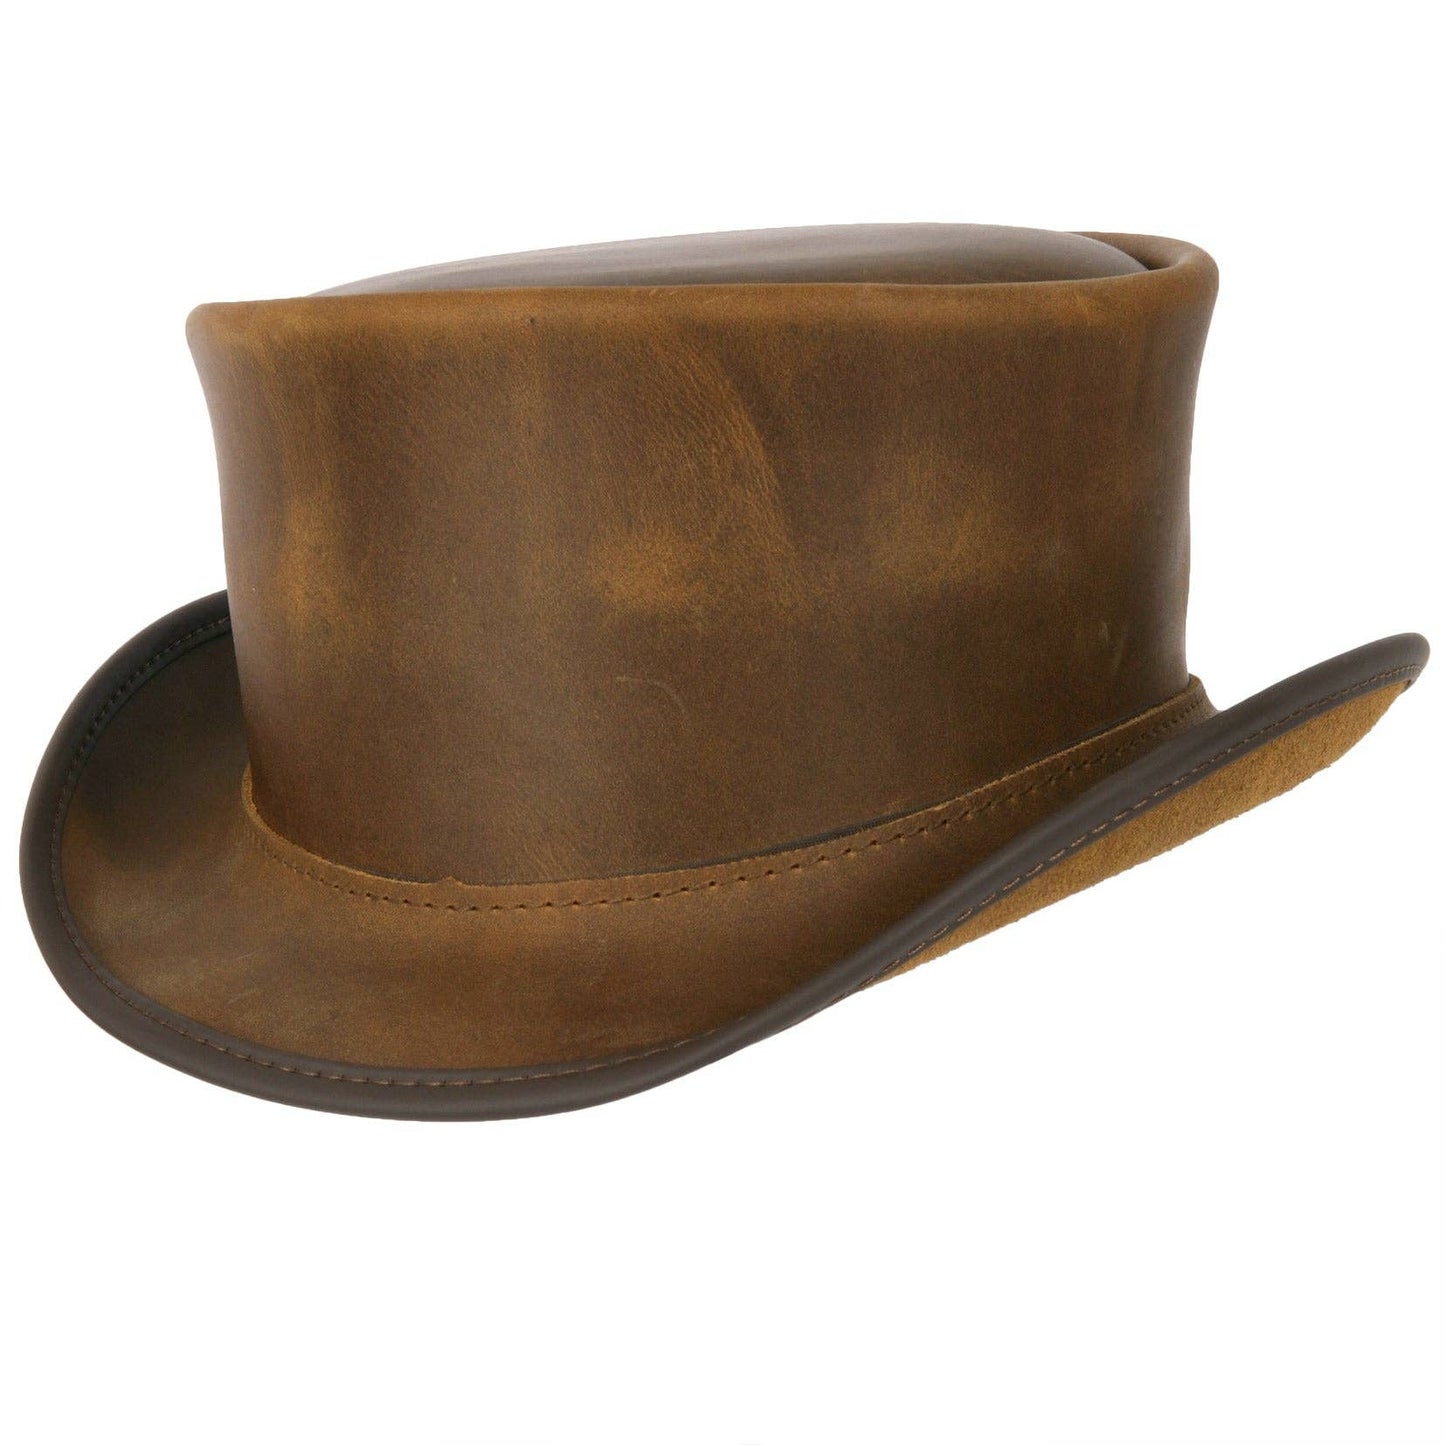 Marlow - Mens Leather Top Hat - Unbanded